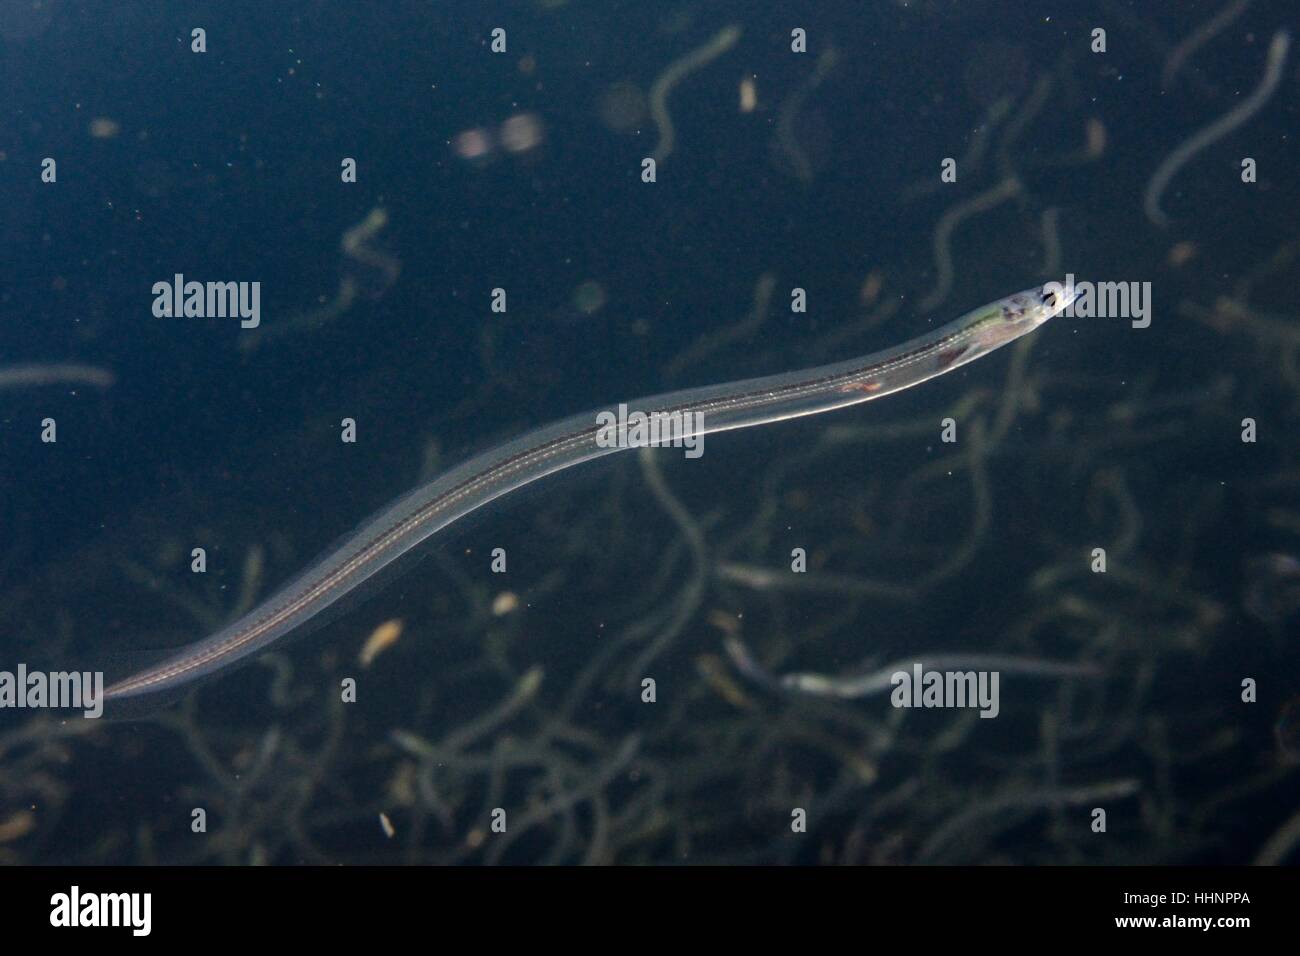 Young European eel (Anguilla anguilla) elvers, or glass eels, caught migrating up rivers from the Bristol channel, swimming,UK Stock Photo